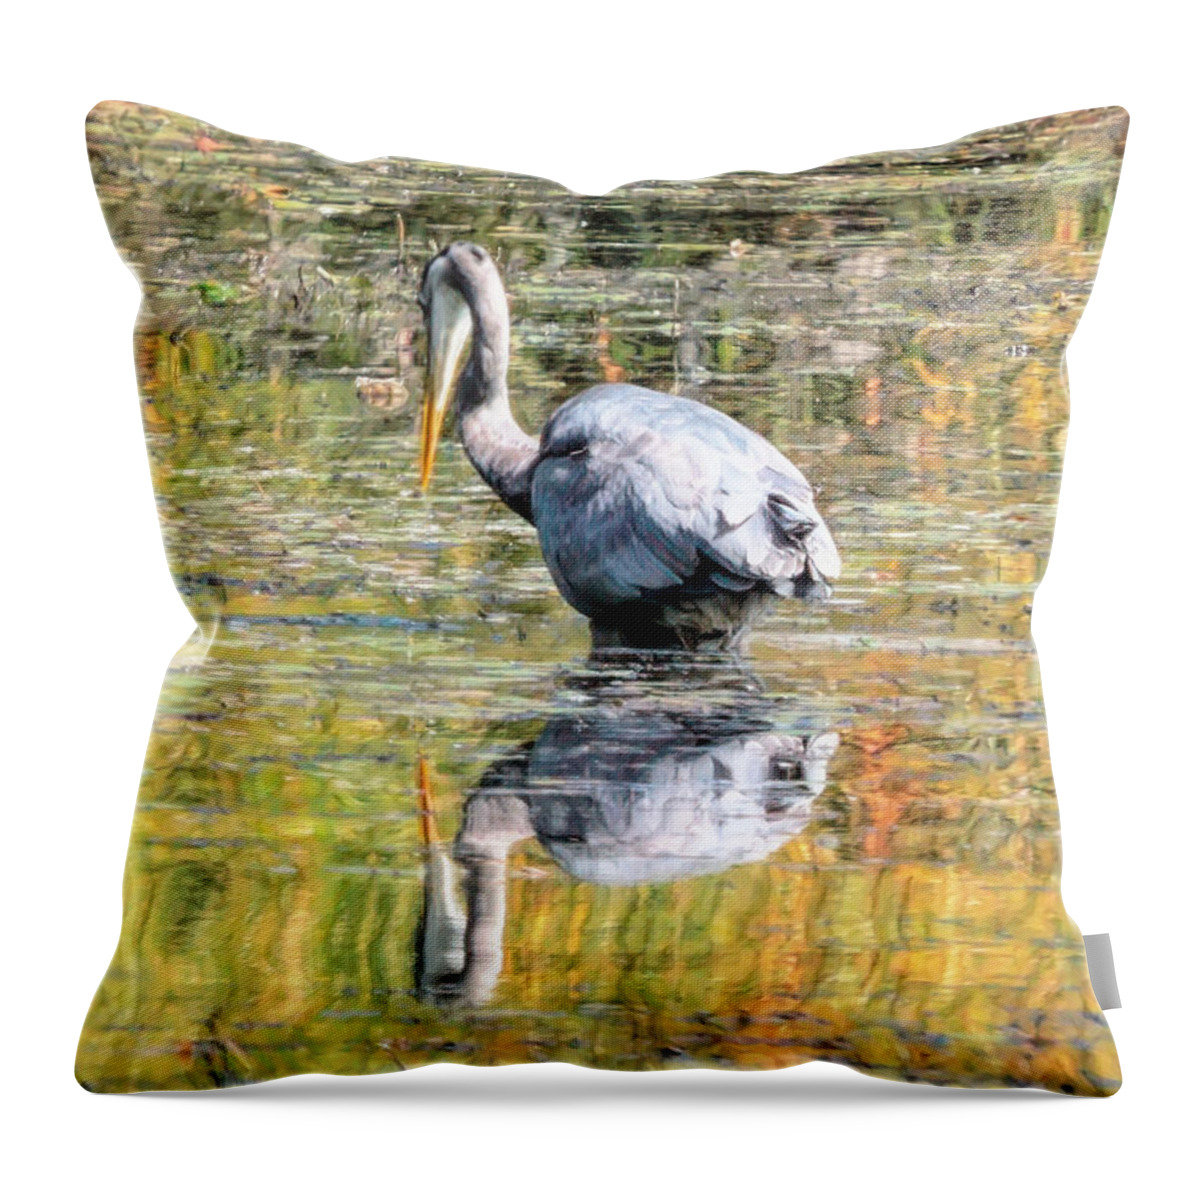 Reflection Throw Pillow featuring the digital art The Heron's Reflection by Susan Hope Finley